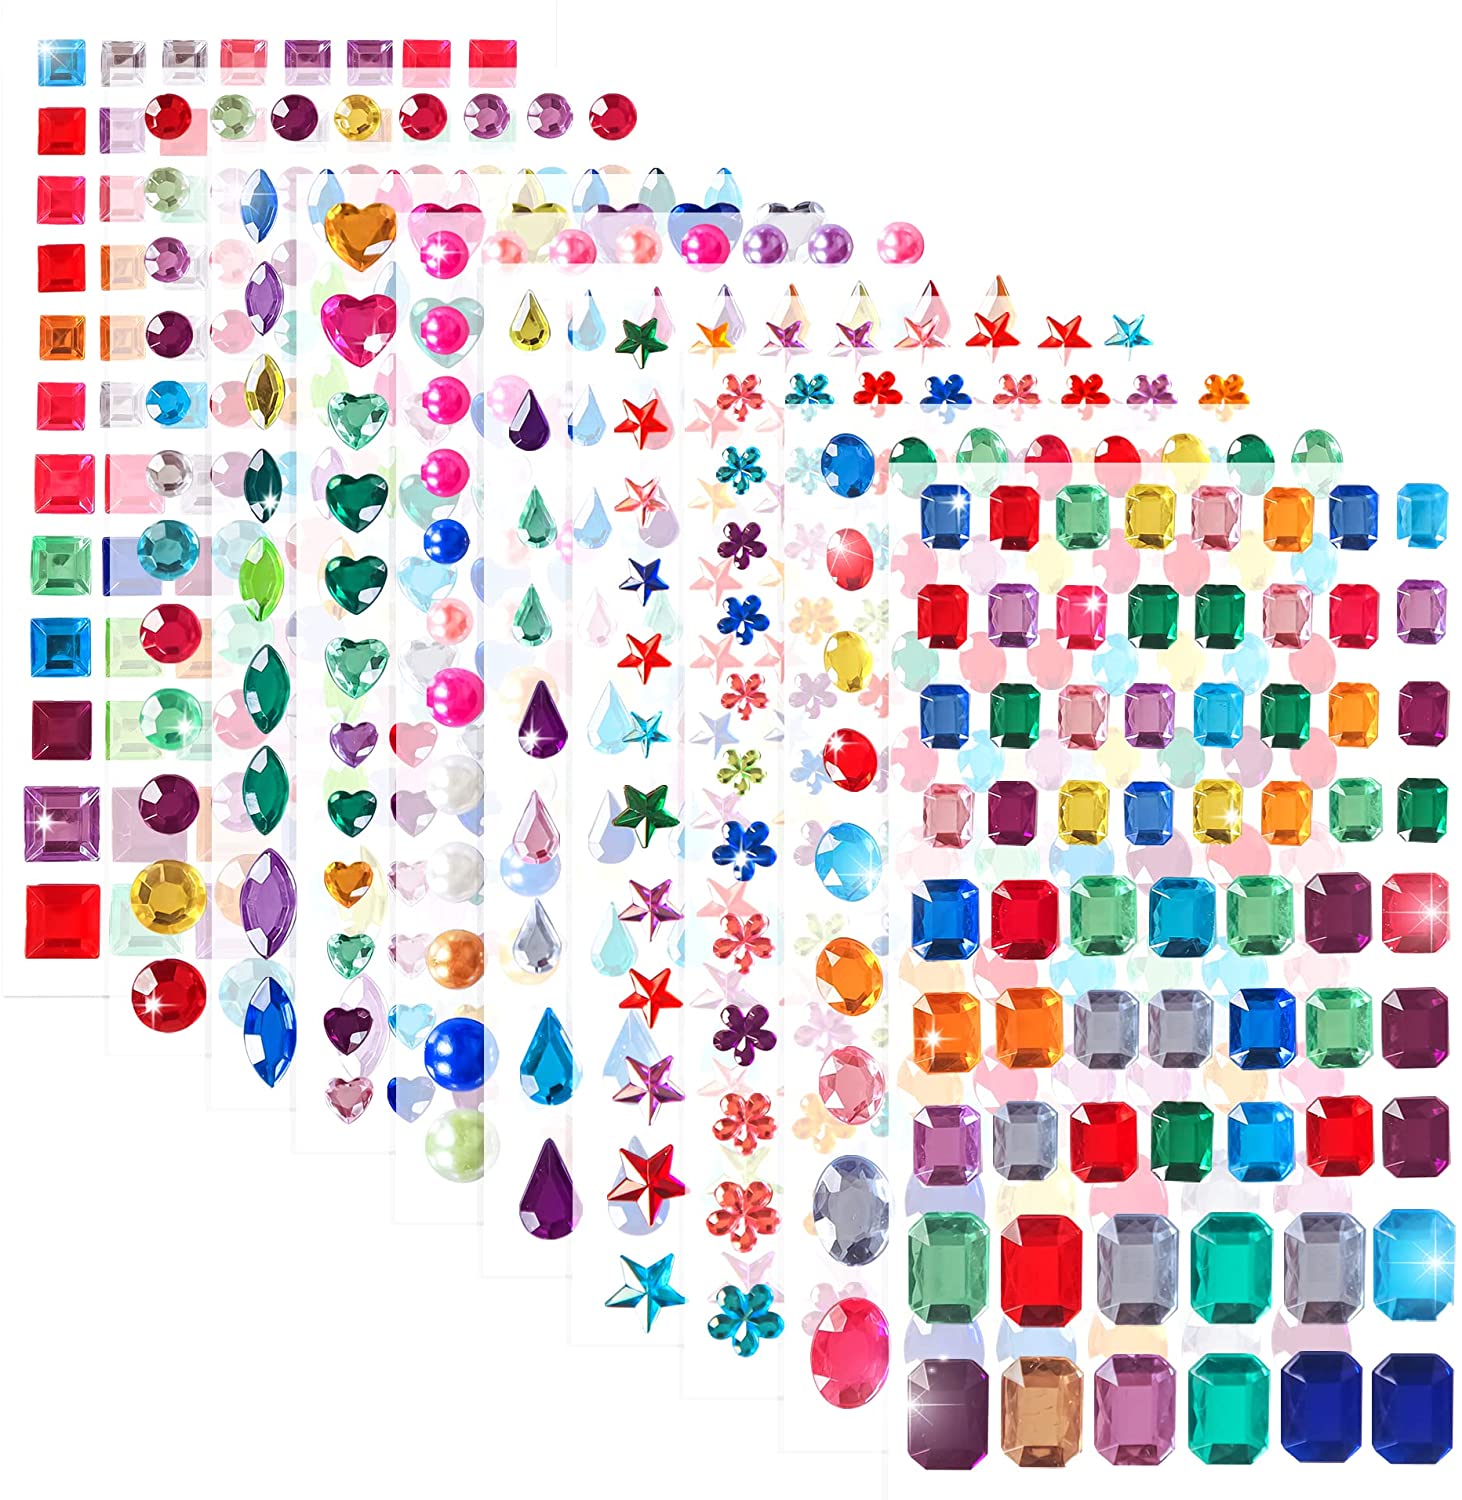 Anezus 4 Sheets Craft Gems Self Adhesive Rhinestones Jewel Stickers with 100Pcs Glitter Foam Stickers Self Adhesive for DIY Crafts Assorted Sizes and Shapes 